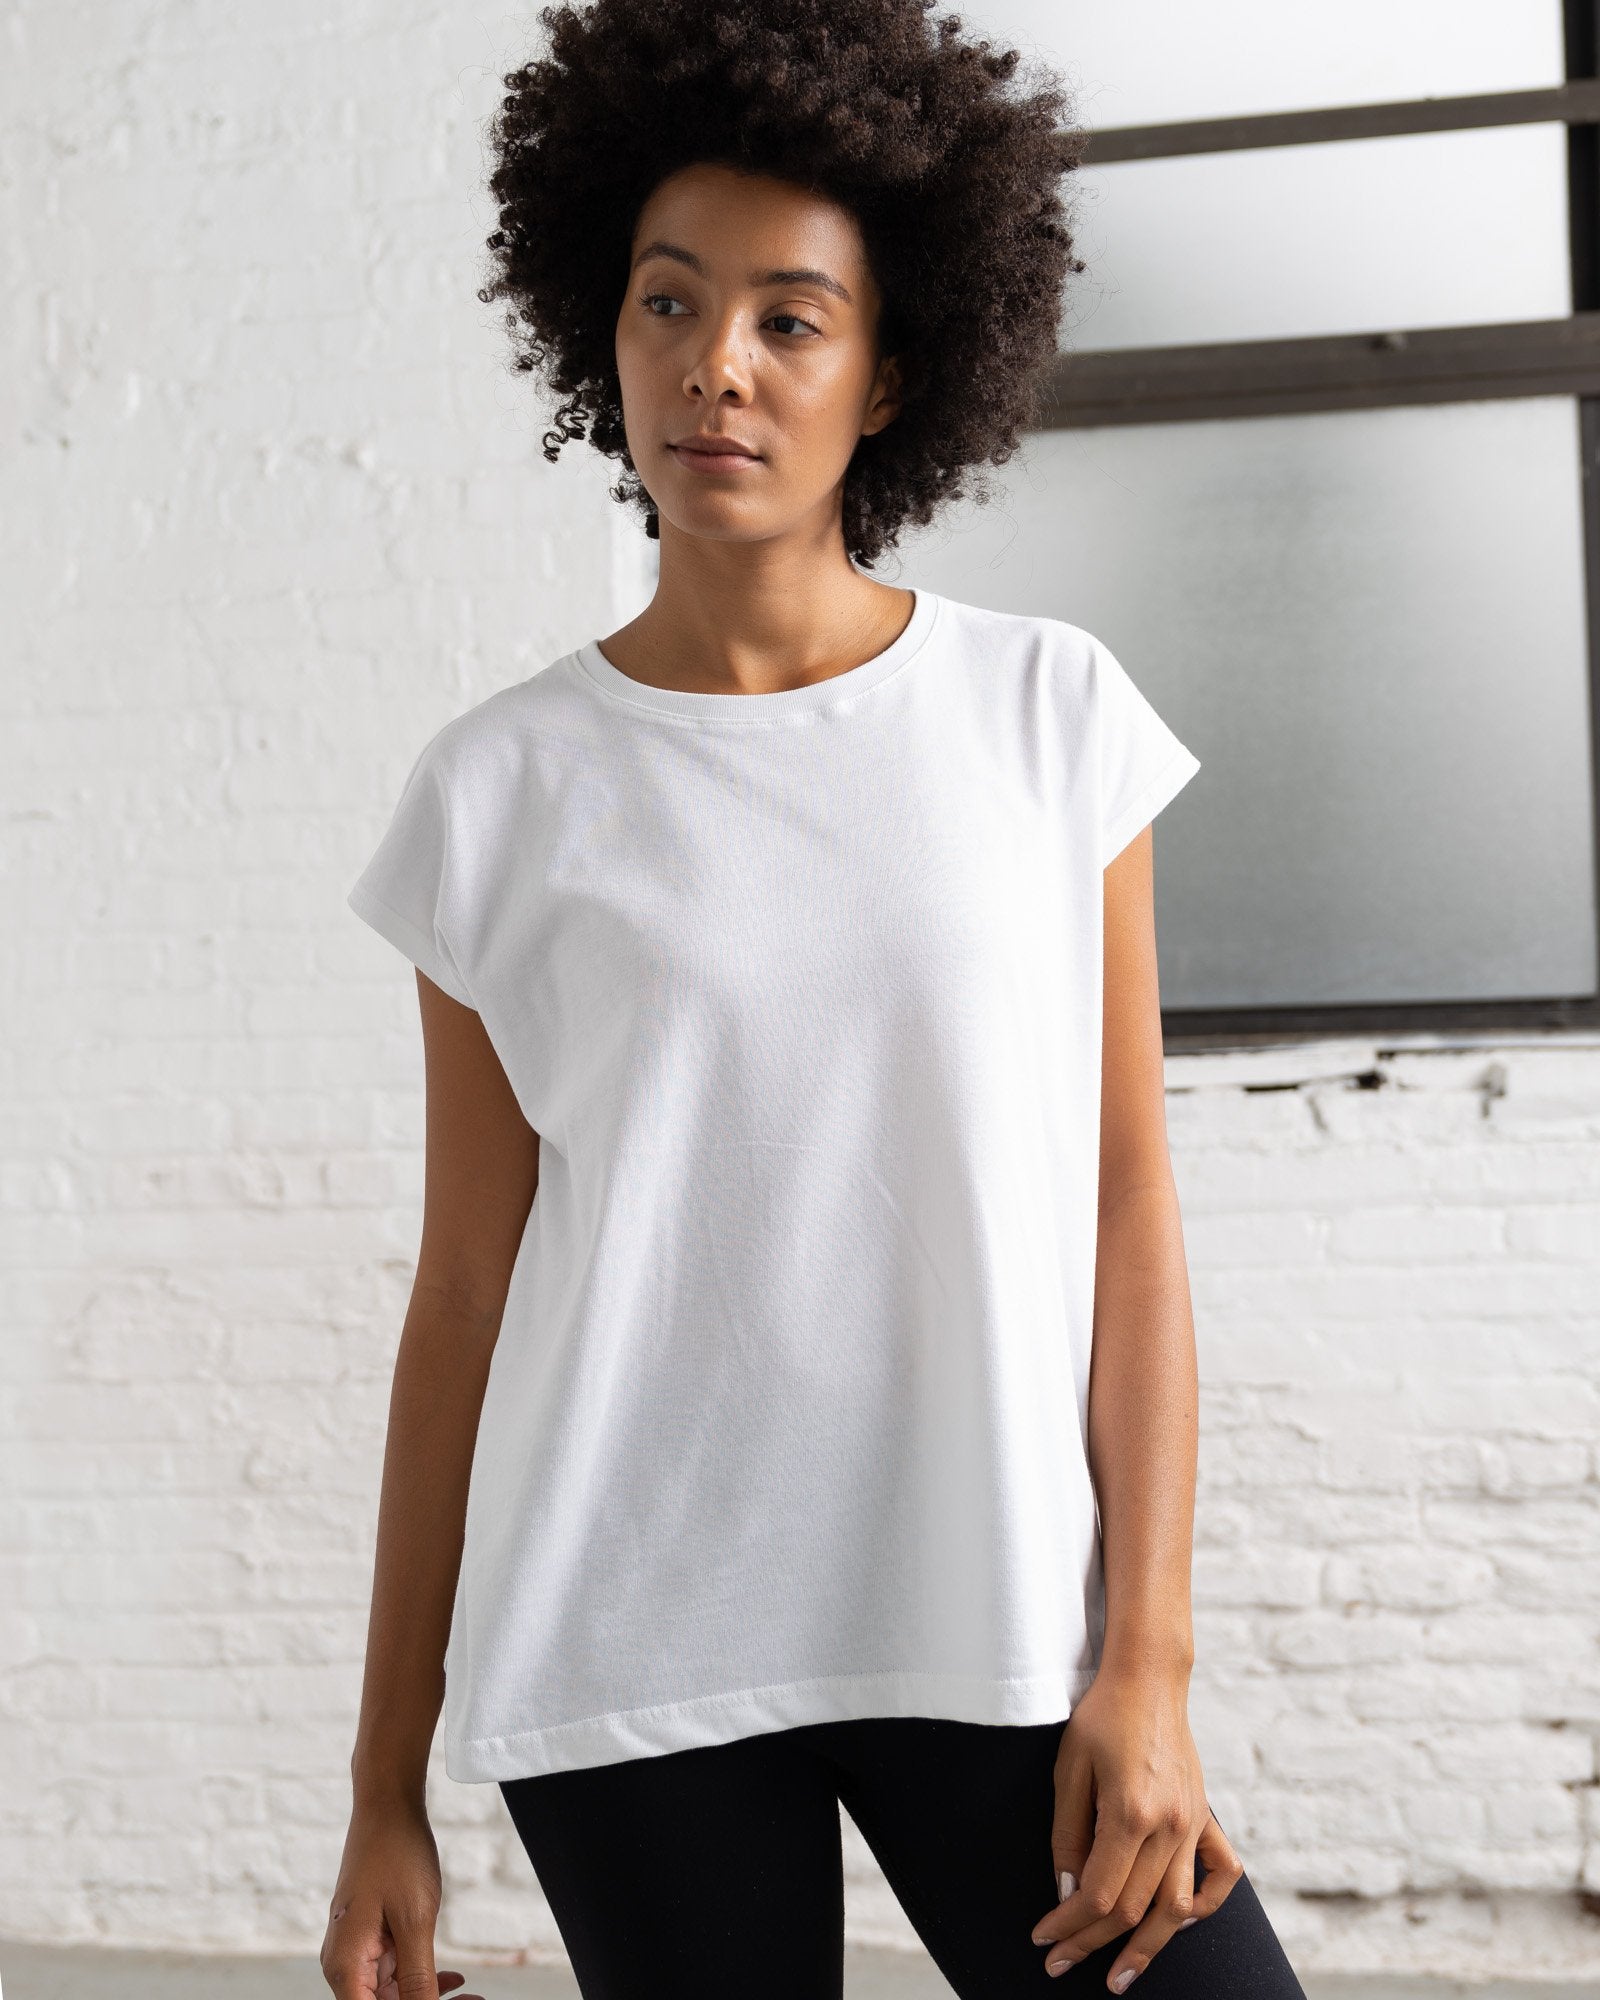 Dolman T Color:White Combed Cotton New T-shirts Women's T-shirts